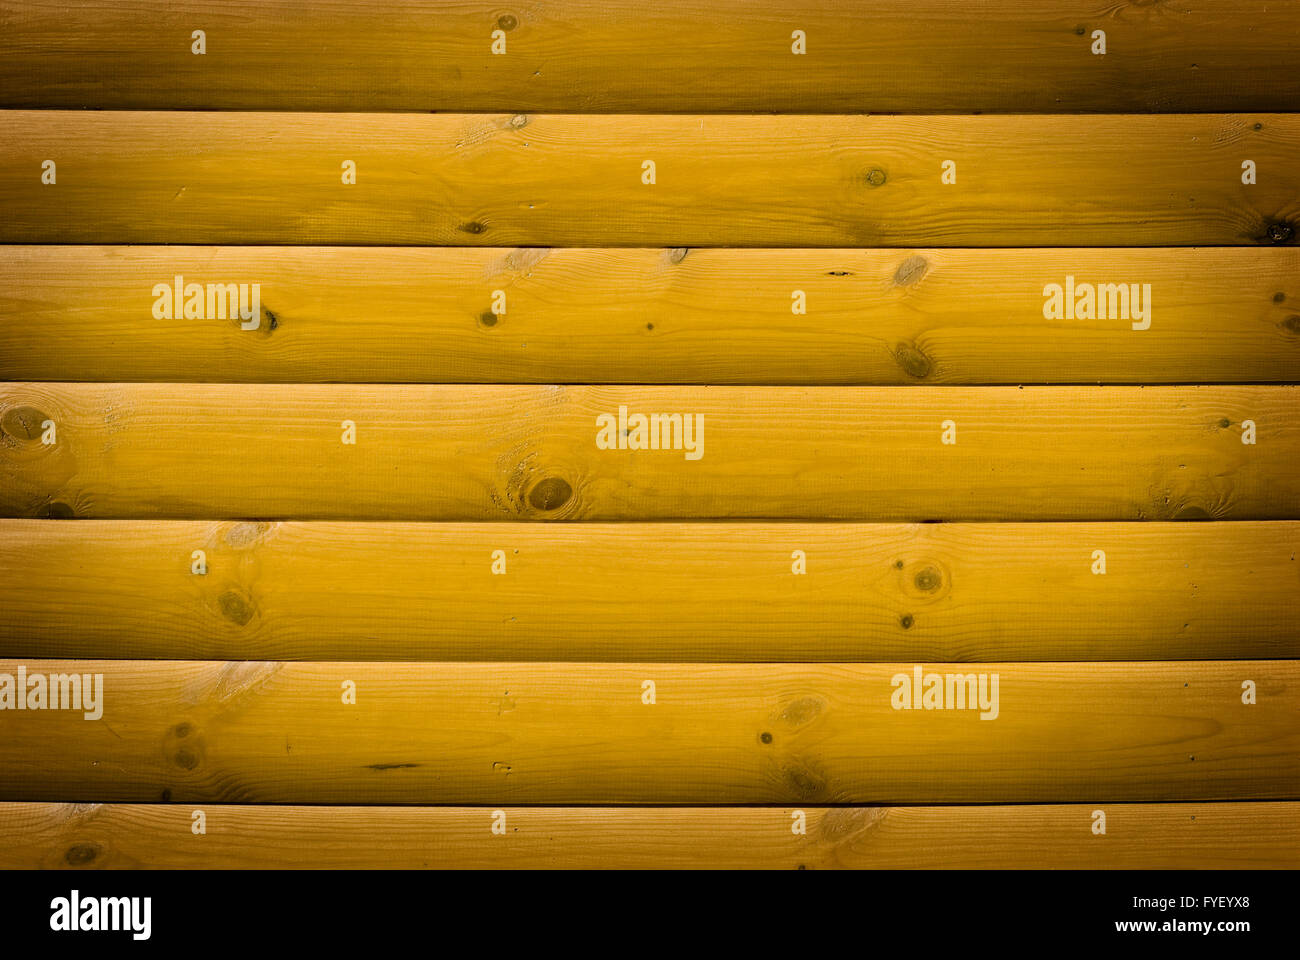 wood texture with natural patterns Stock Photo